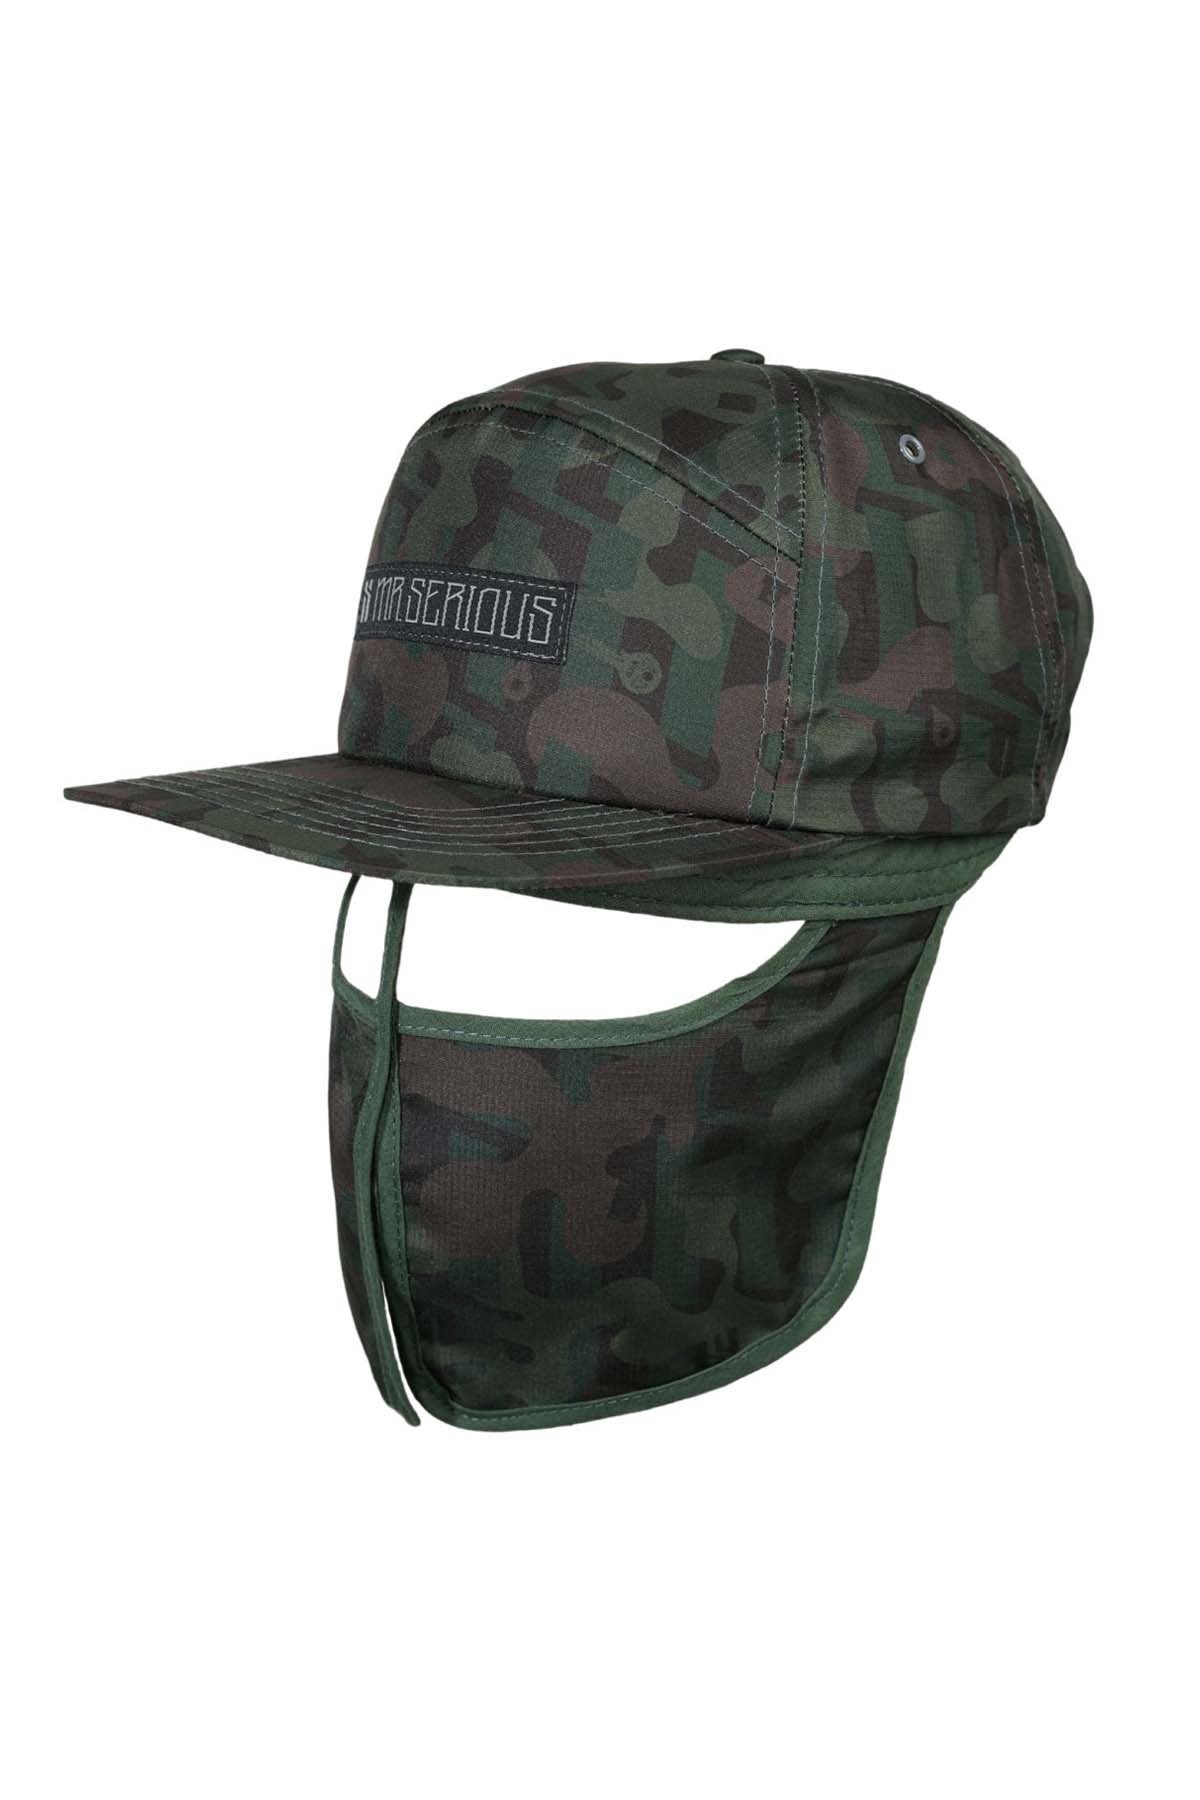 Mr. Serious UNKNOWN CAMOUFLAGE Cap